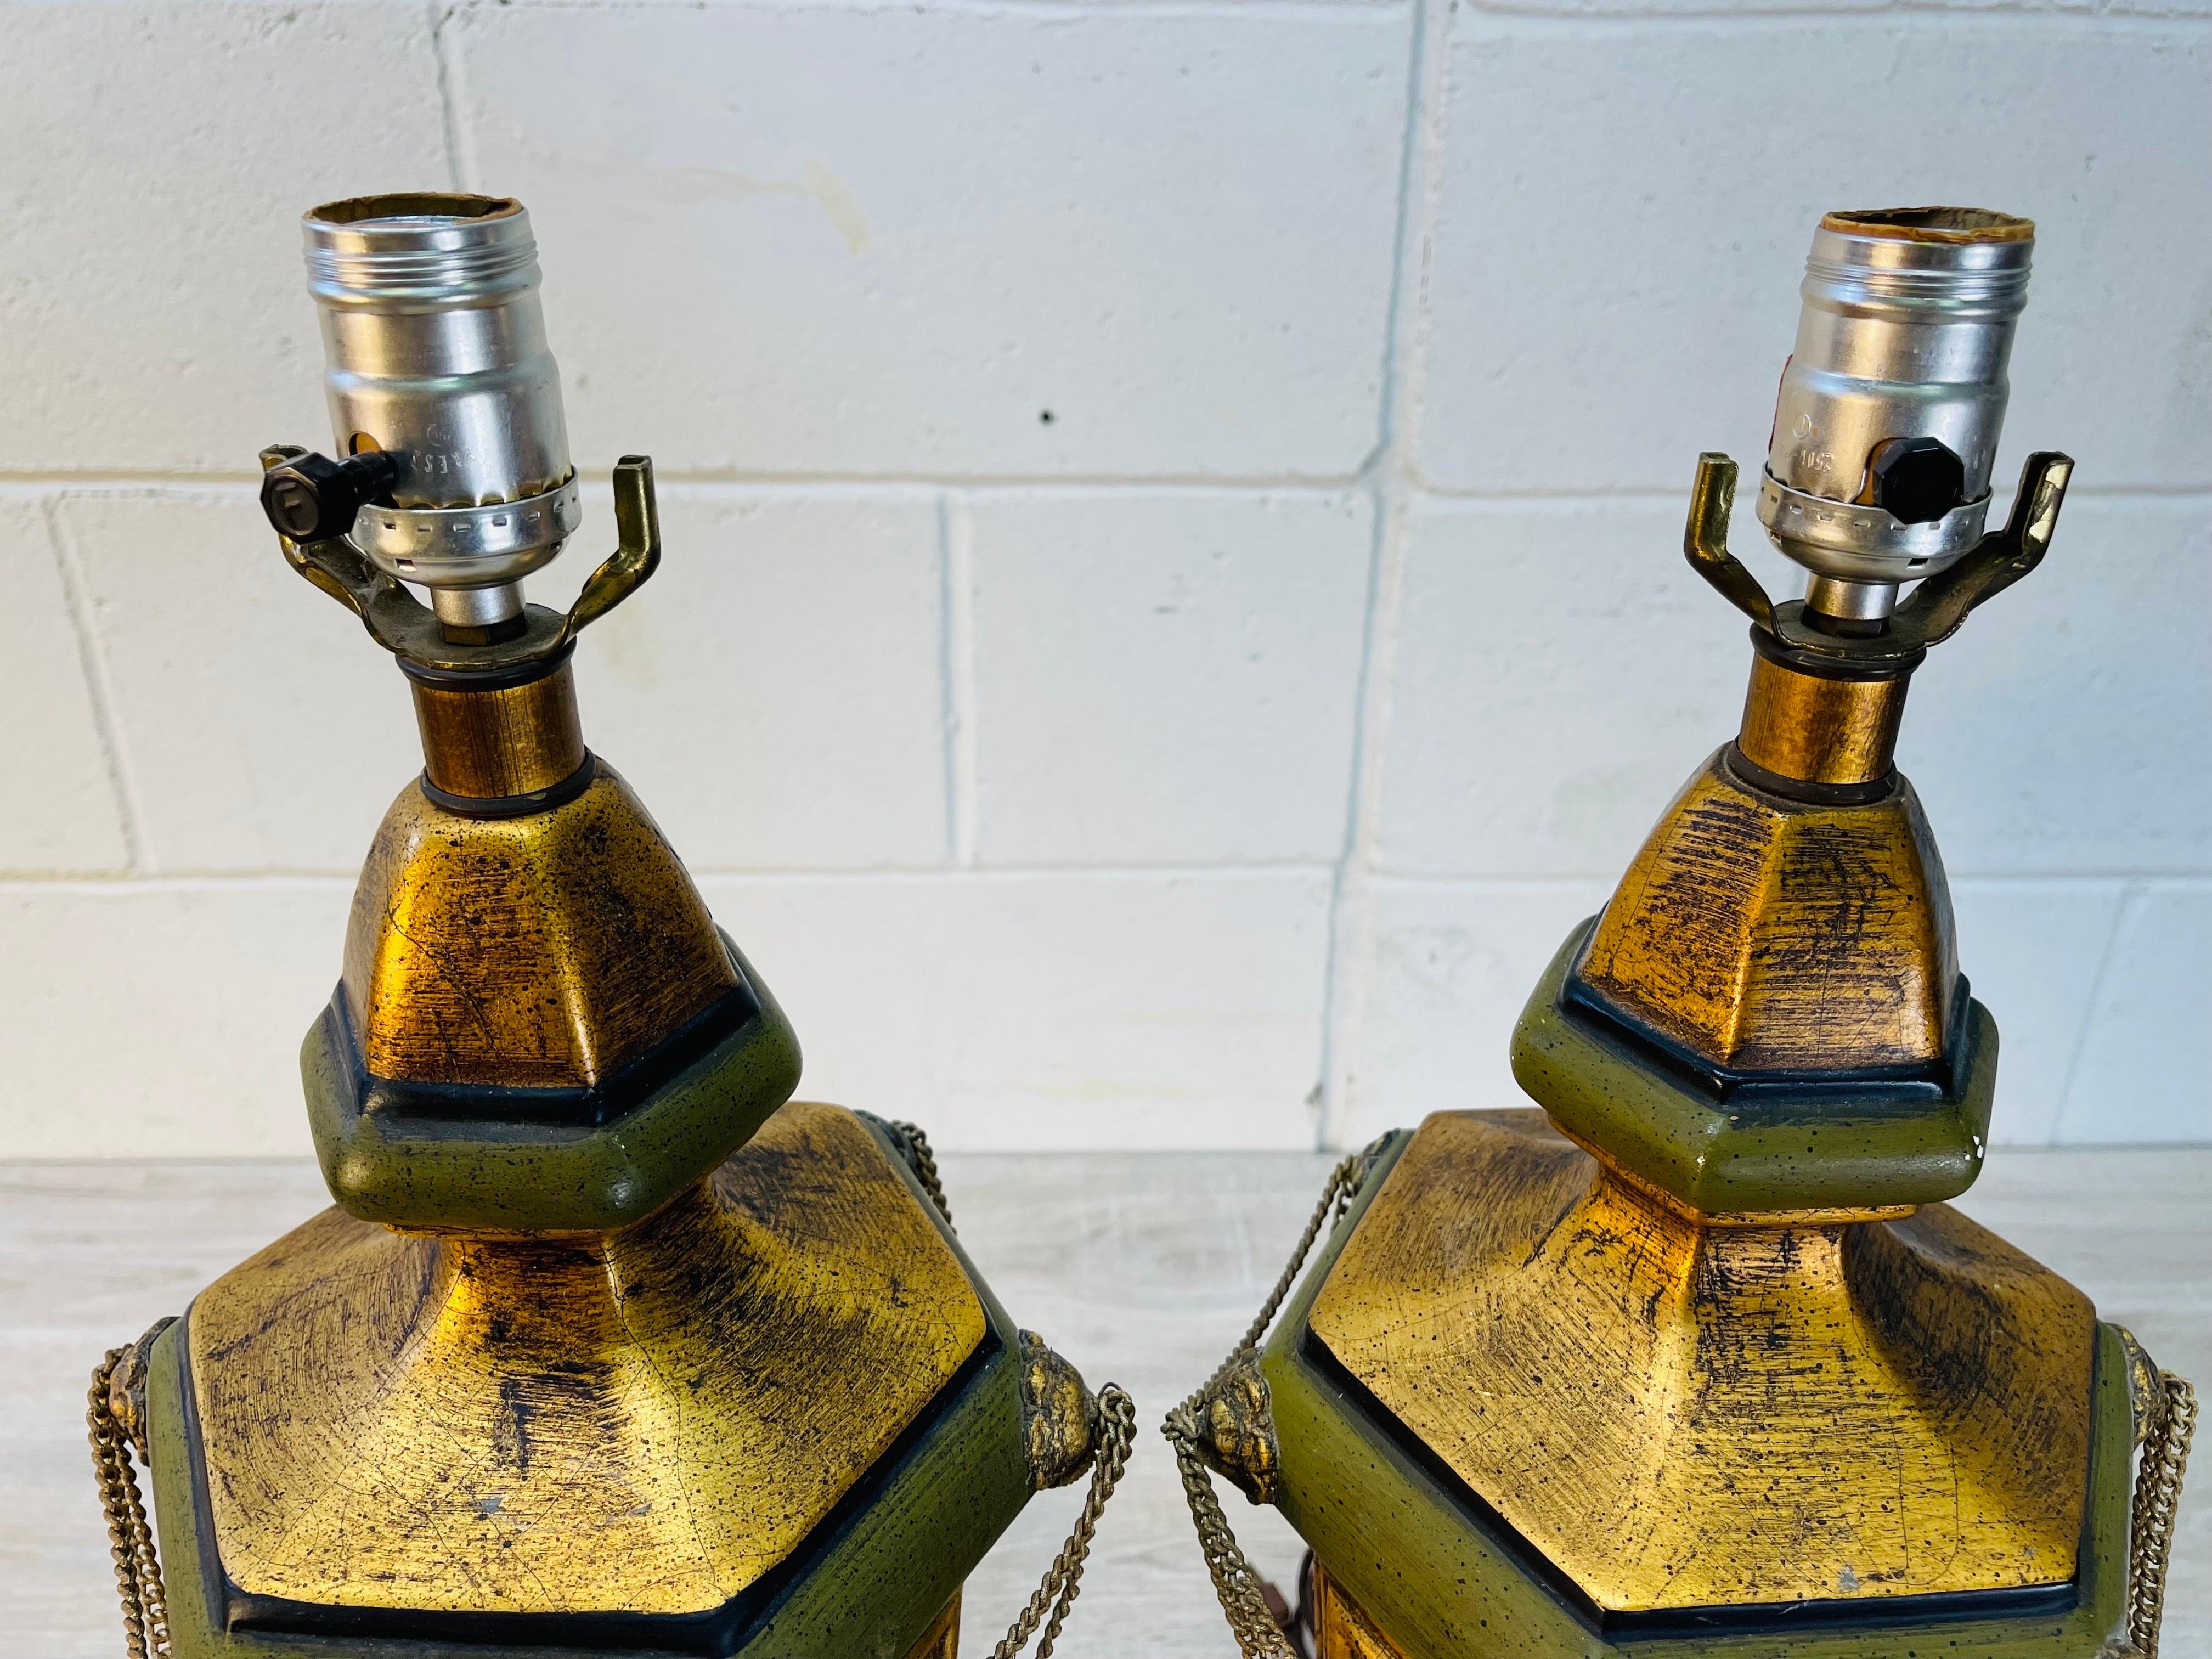 Vintage 1960s pair of green and gold urn style table lamps with swag metal accents. The lamps are wired for the US and in working condition. They use a standard 100W bulb. The lamps do not have harps but do come with the original shades. The shades